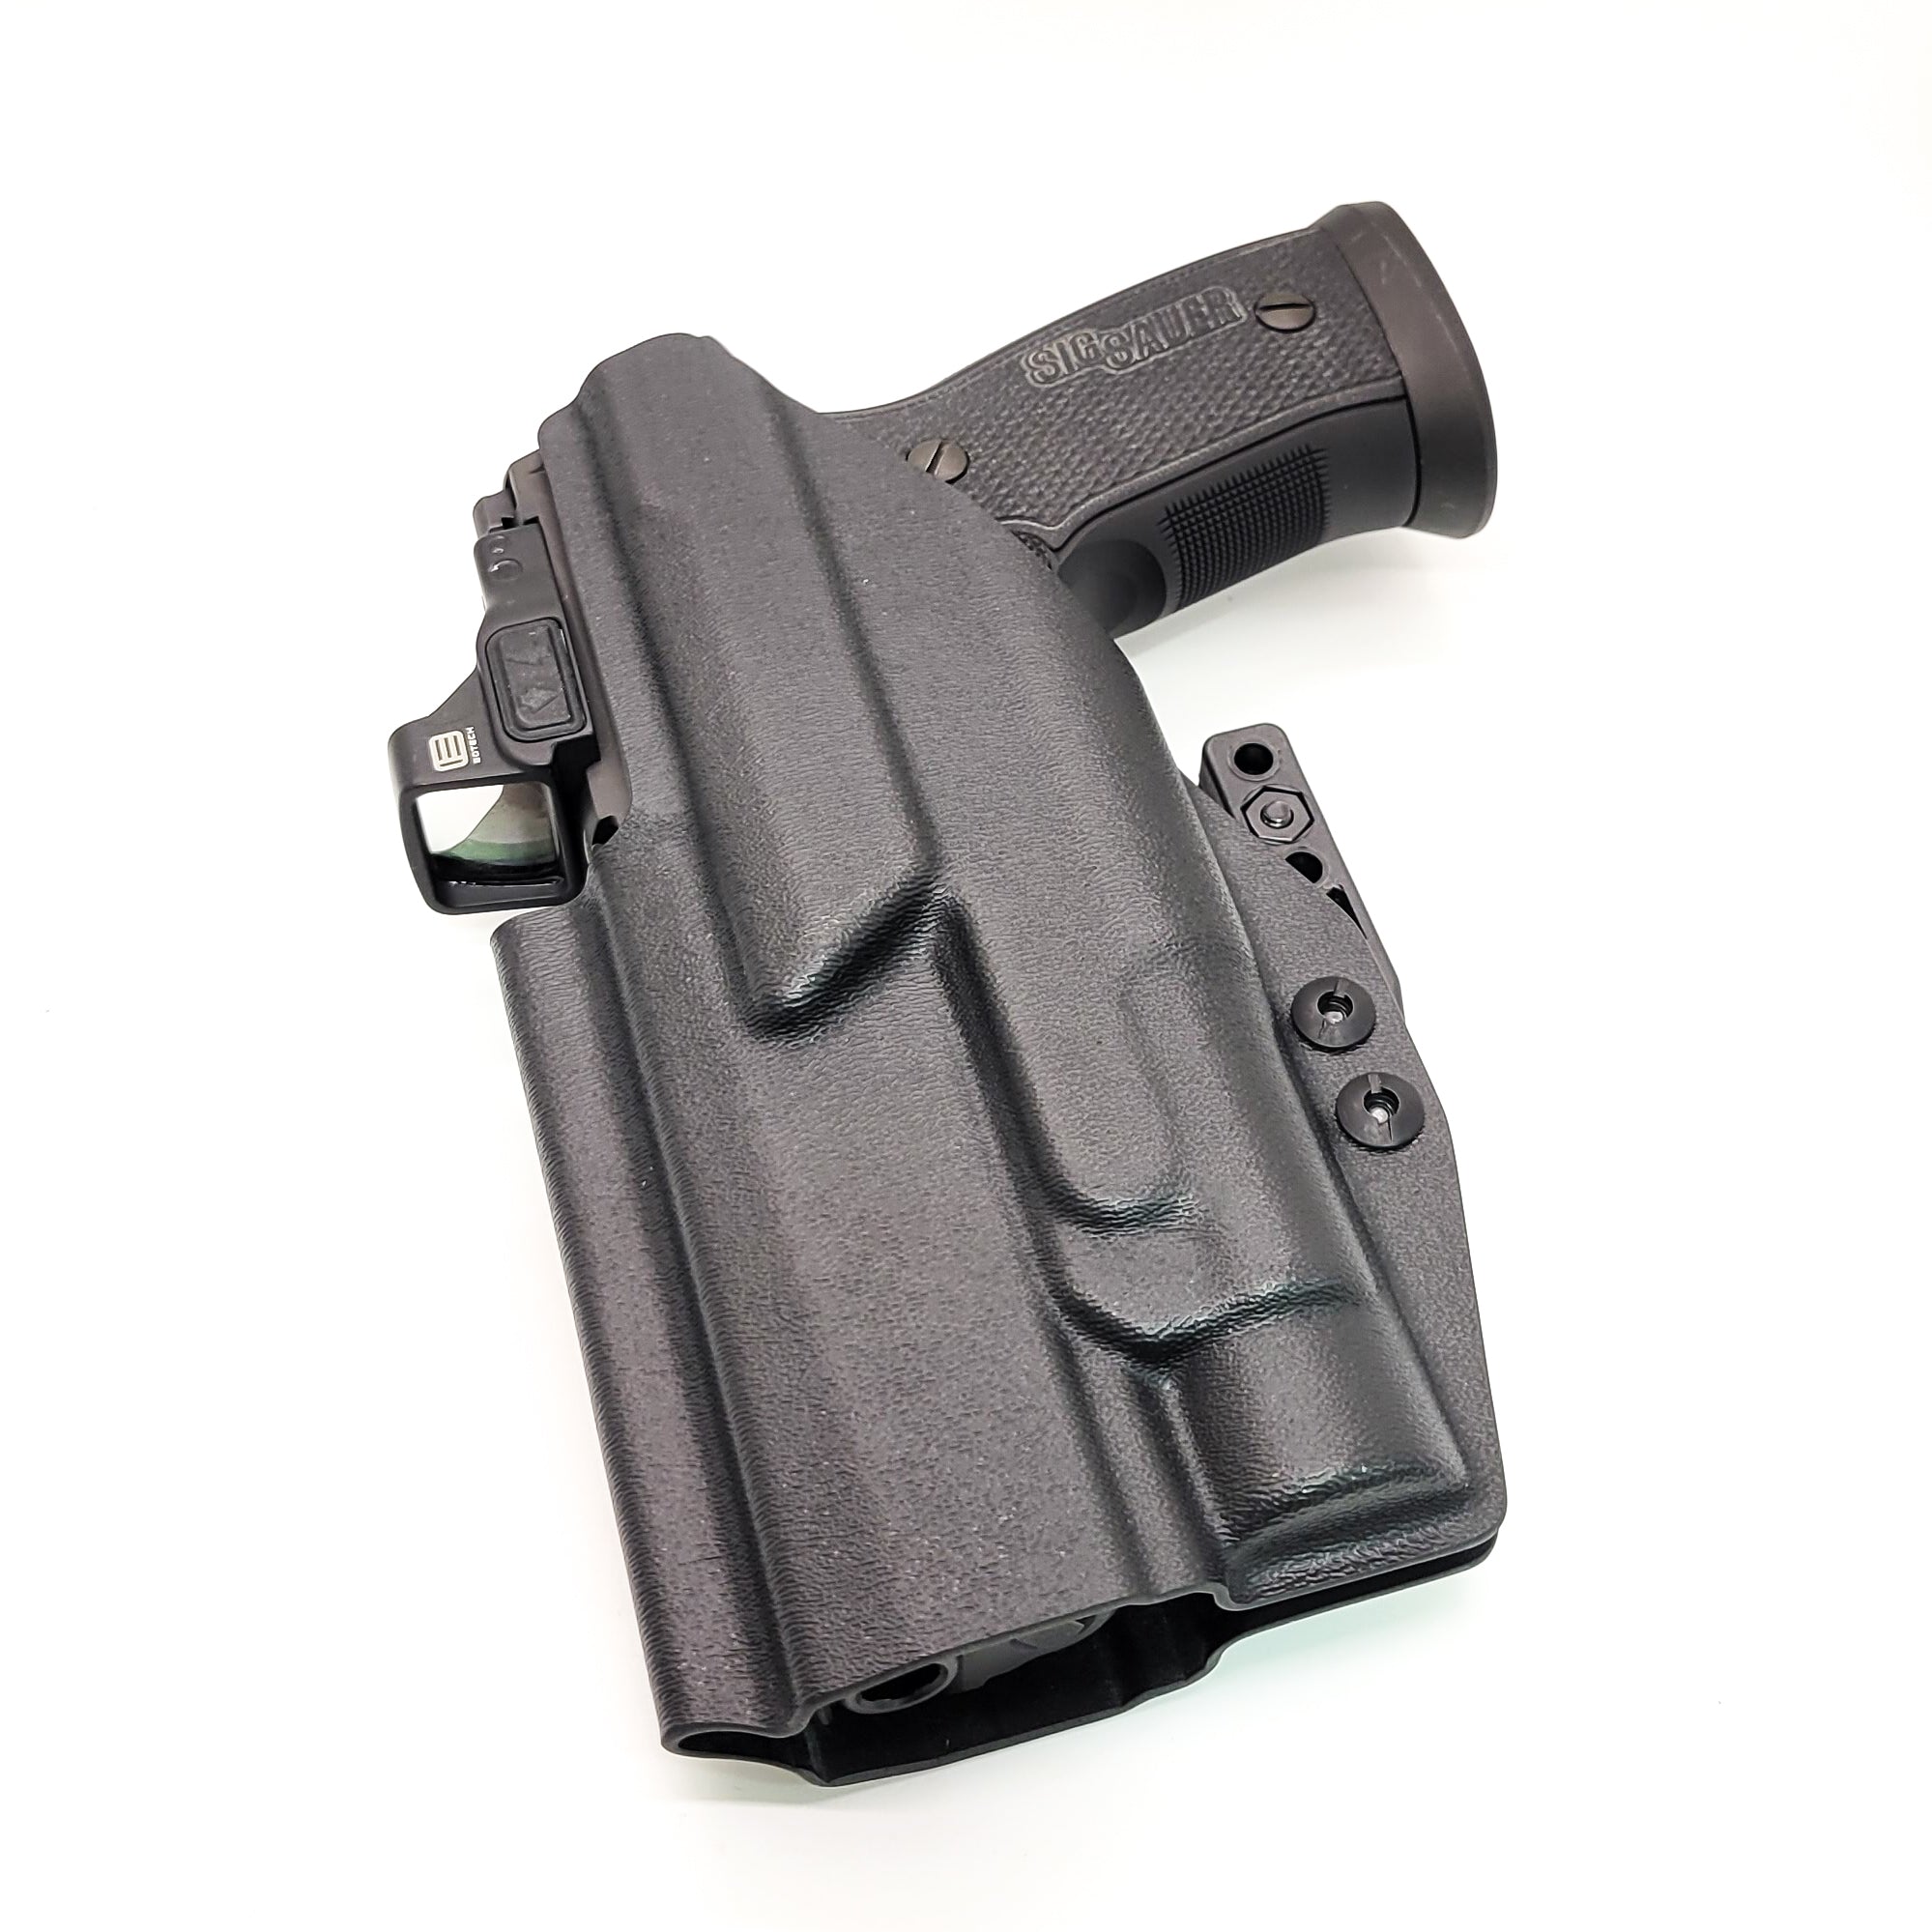 For the best IWB AIWB Inside Waistband Kydex Holster designed to fit the Sig Sauer P320 series of pistols with the Streamlight TLR-1 or TLR-1 HL light and GoGun USA Gas Pedal shop Four Brothers Holsters. This holster will hold the Full Size, Carry, M18, M17, X-Five & X-Five Legion with TLR-1HL light. Made in USA 